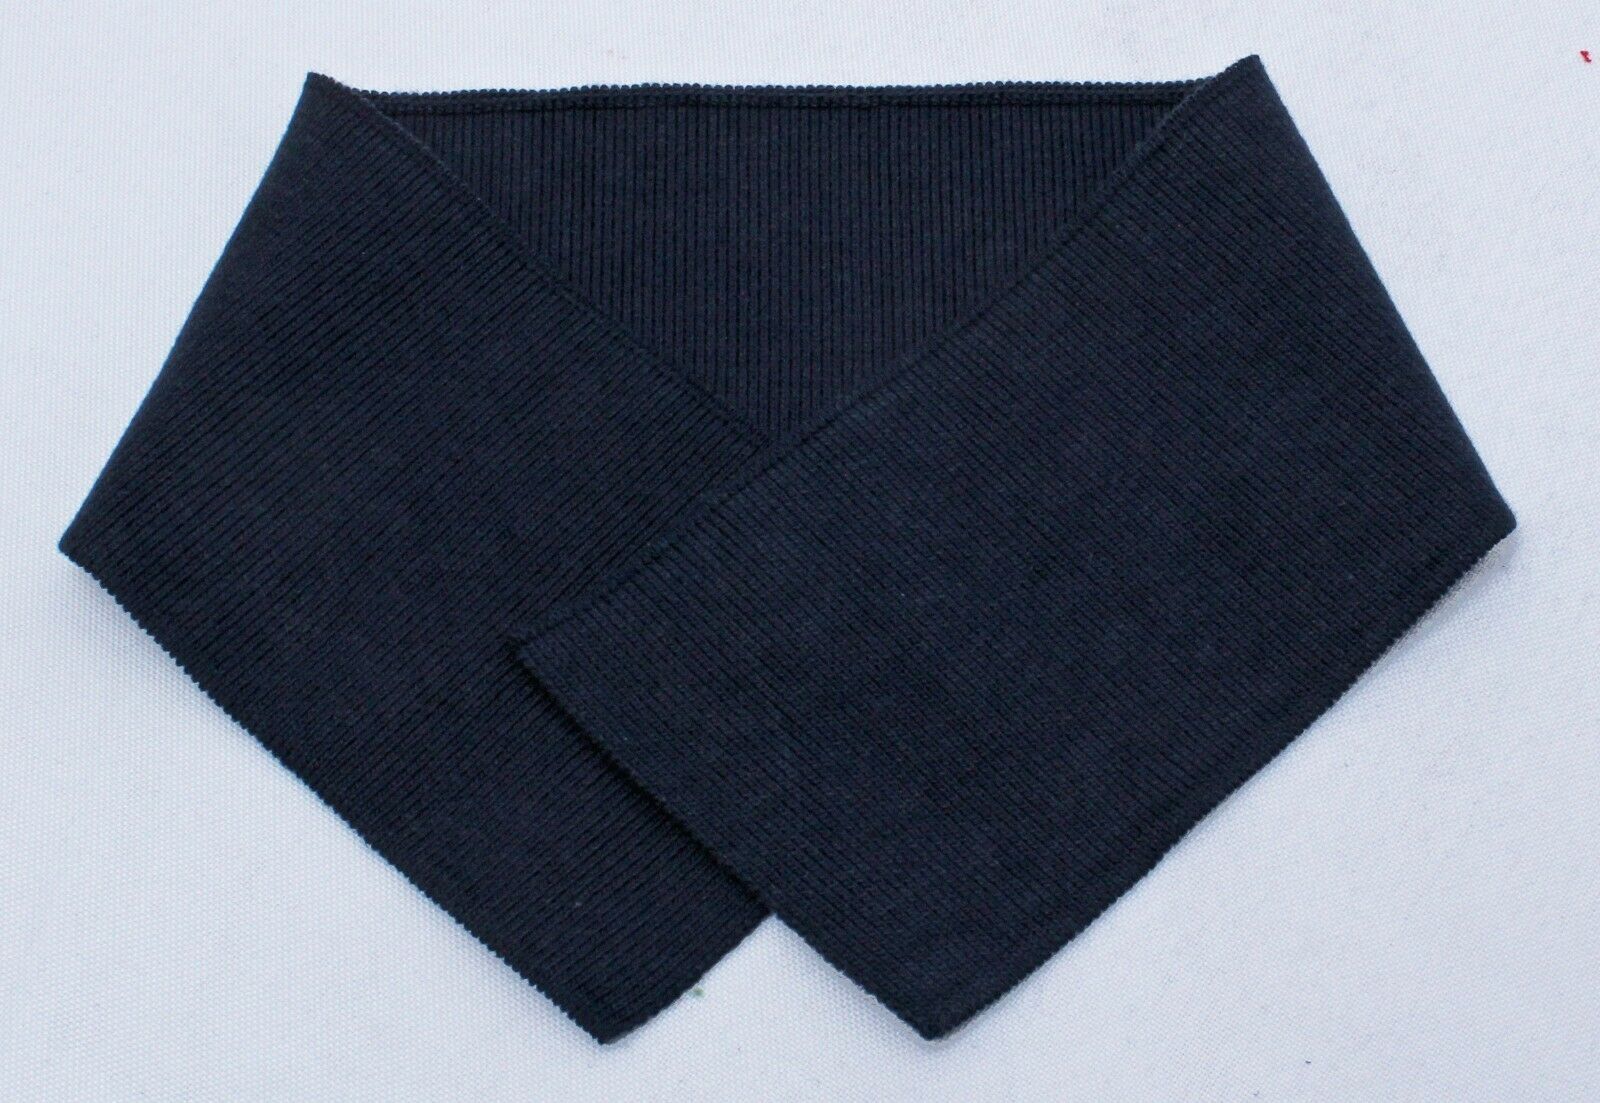 Primary image for Rugby Knit Shirt Collar - Dark Navy 3" x 17" Self-Finished Ribbed Trim M516.17